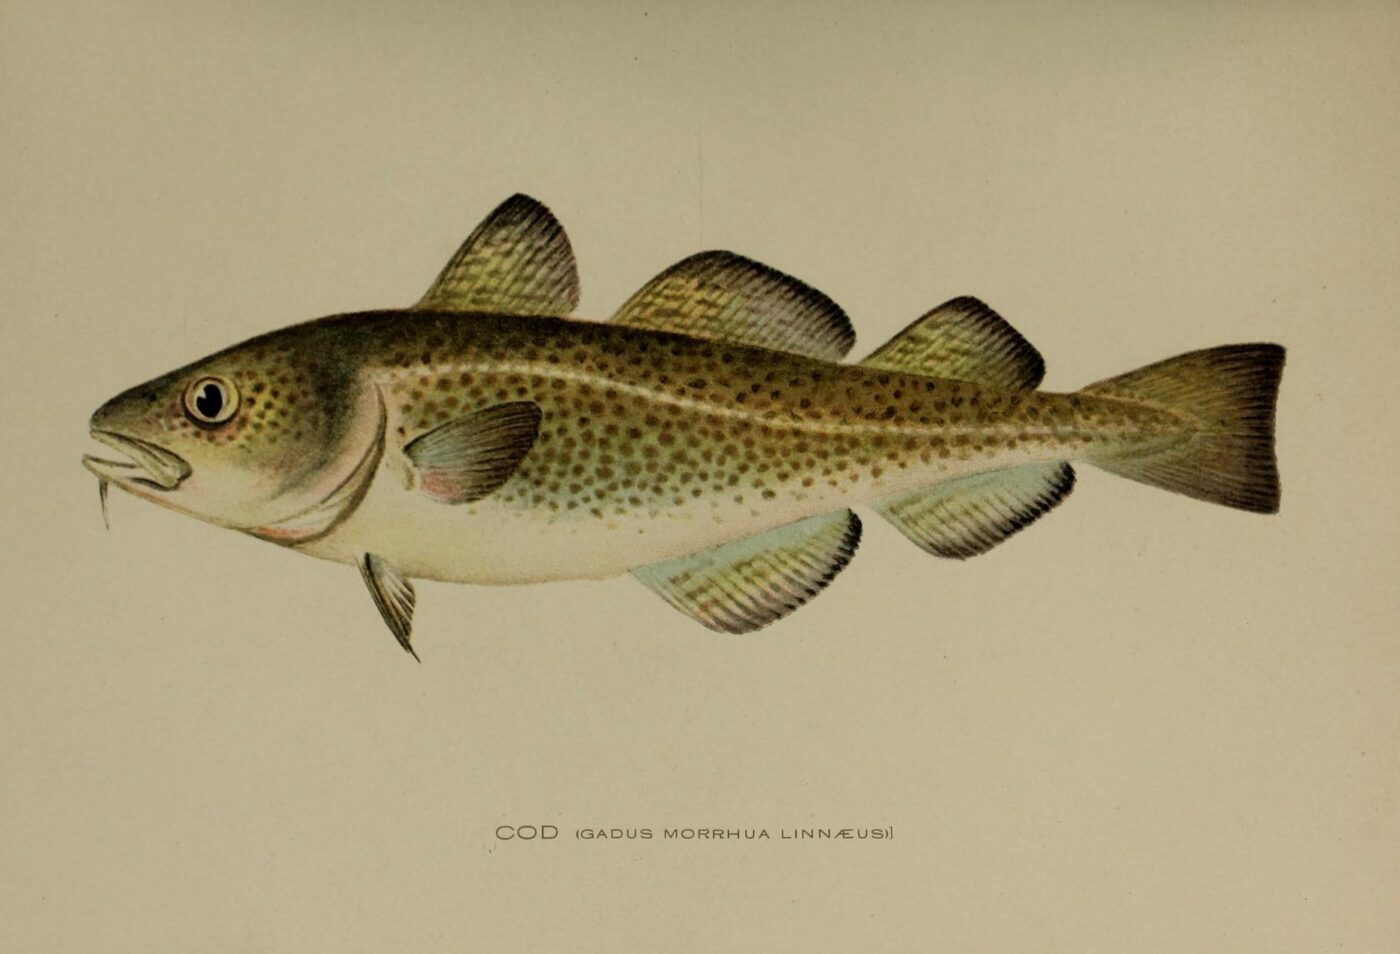 Kabeljauw  Gadus morrhua - Annual report New York State Forest Fish and Game Commission1902 - Wikimedia Commons